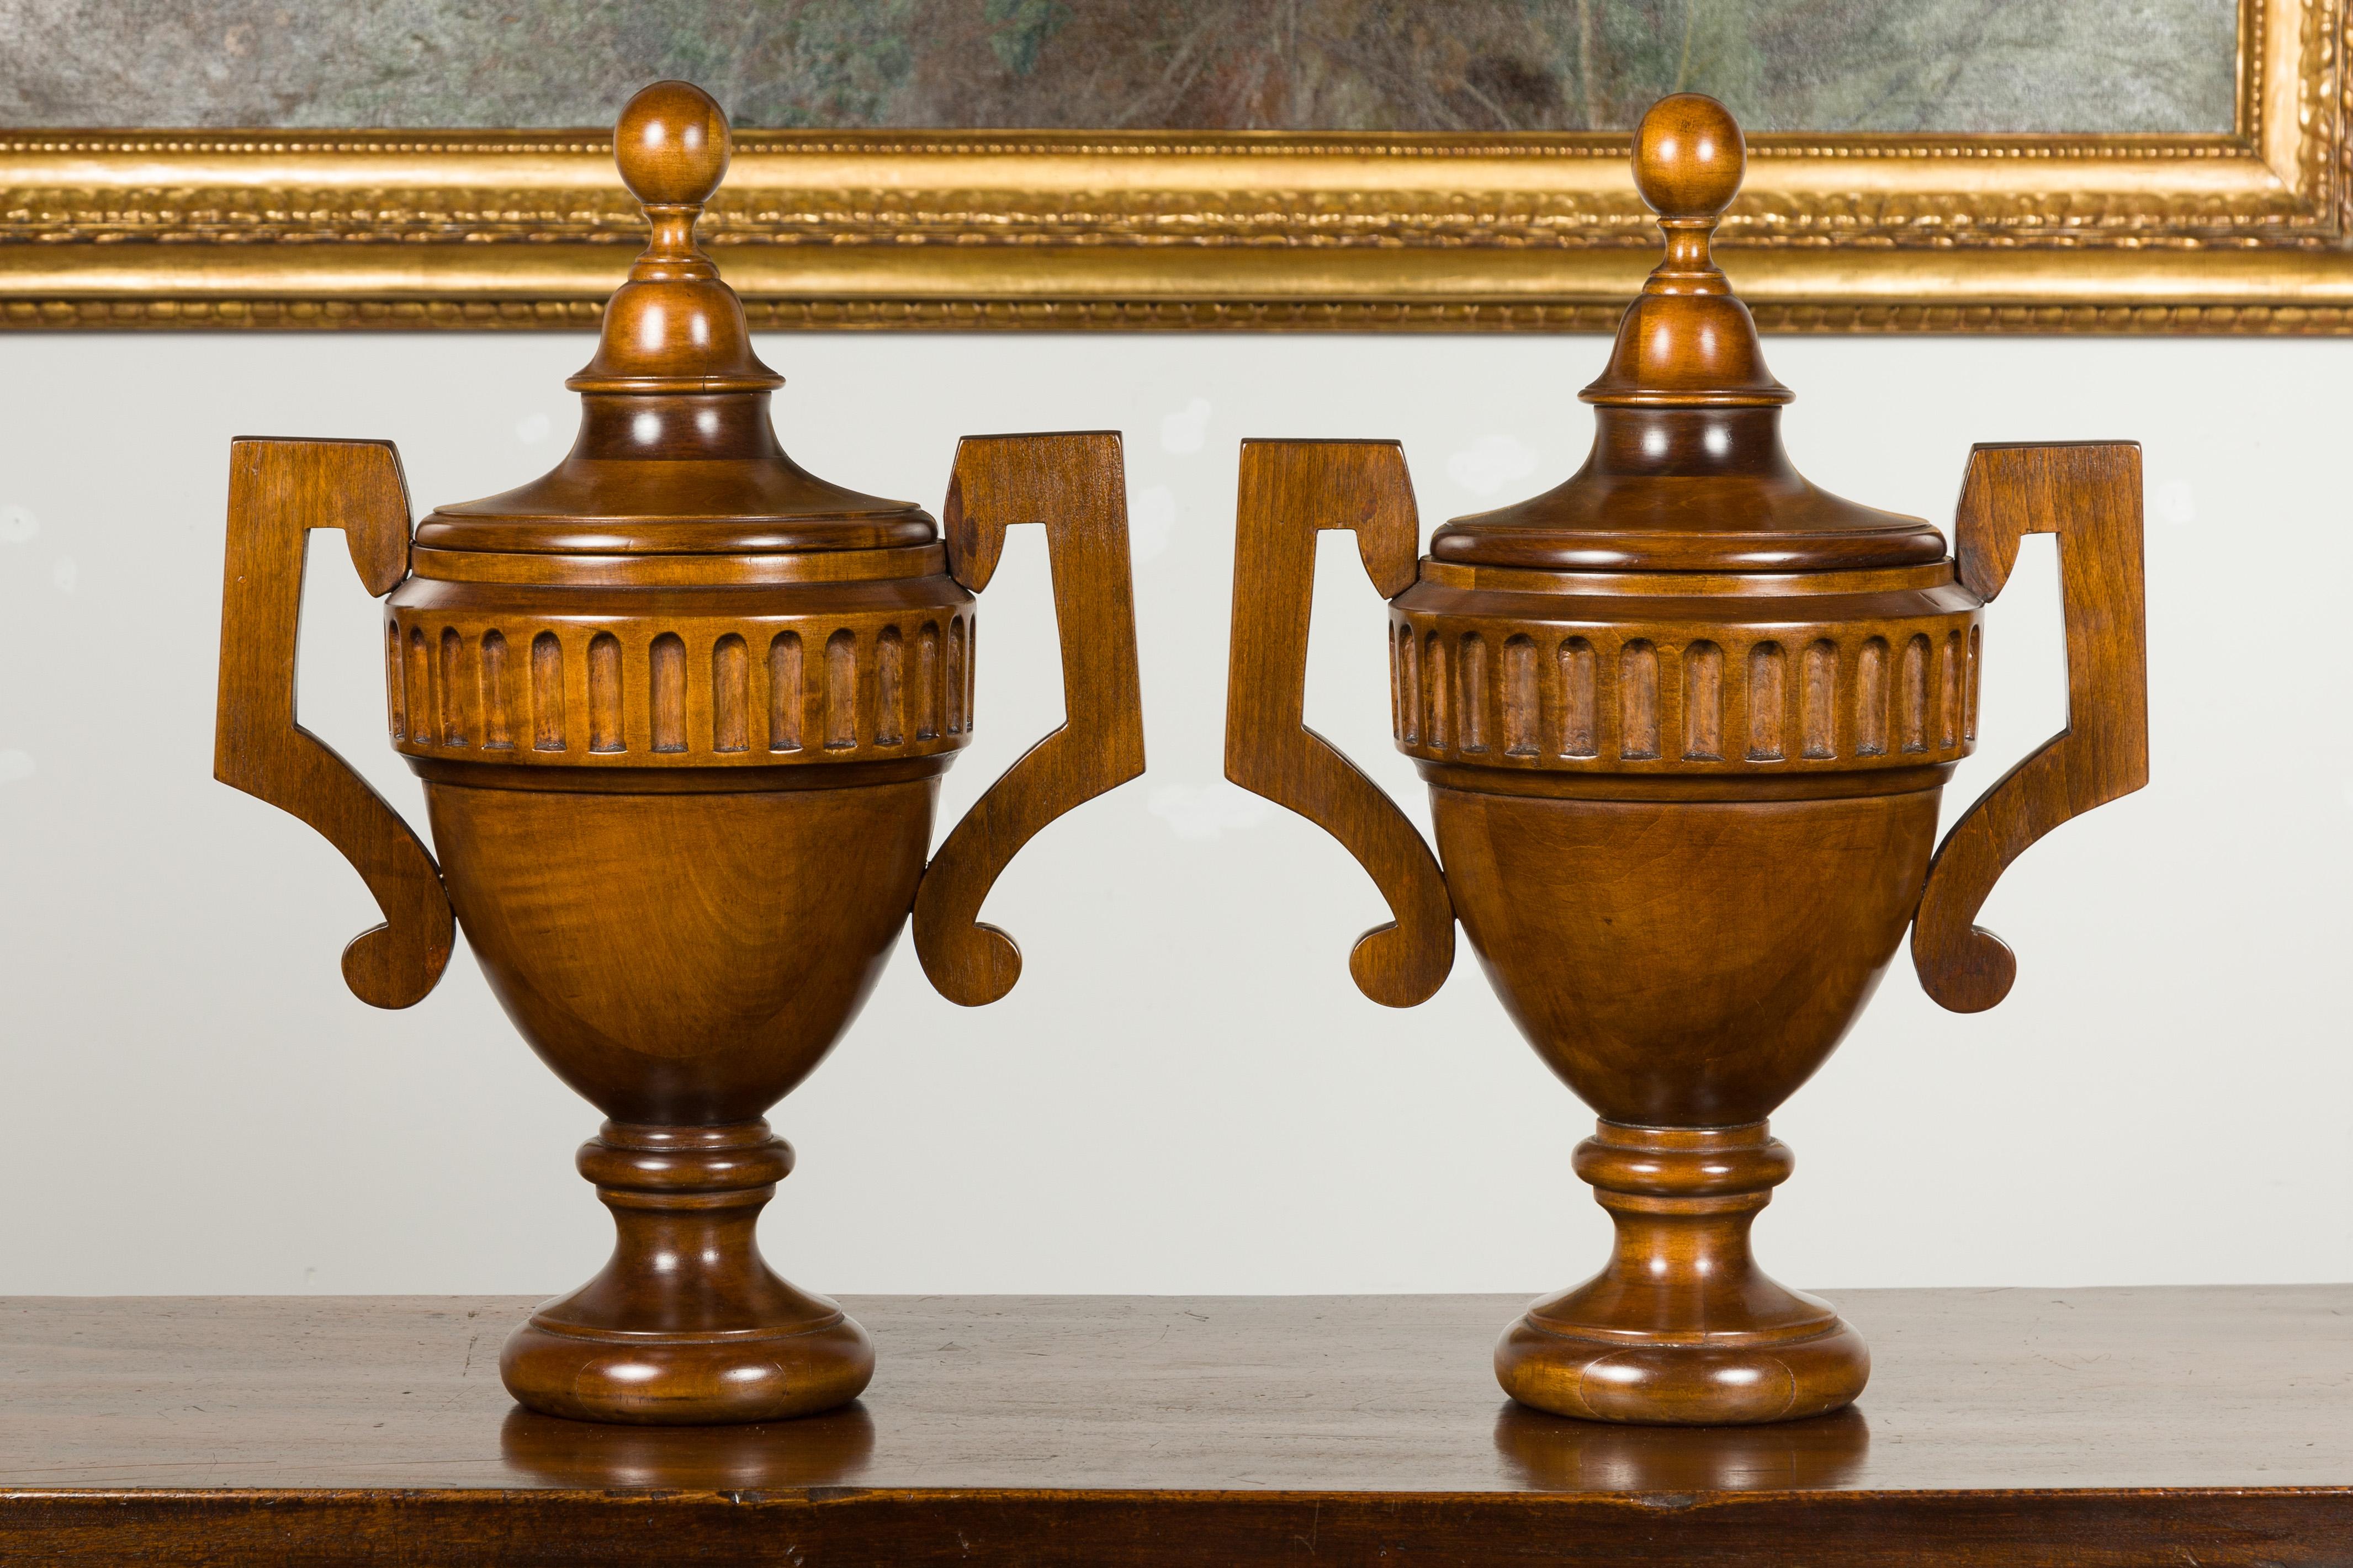 Pair of Midcentury English Carved Walnut Lidded Urns with Large Handles In Good Condition For Sale In Atlanta, GA